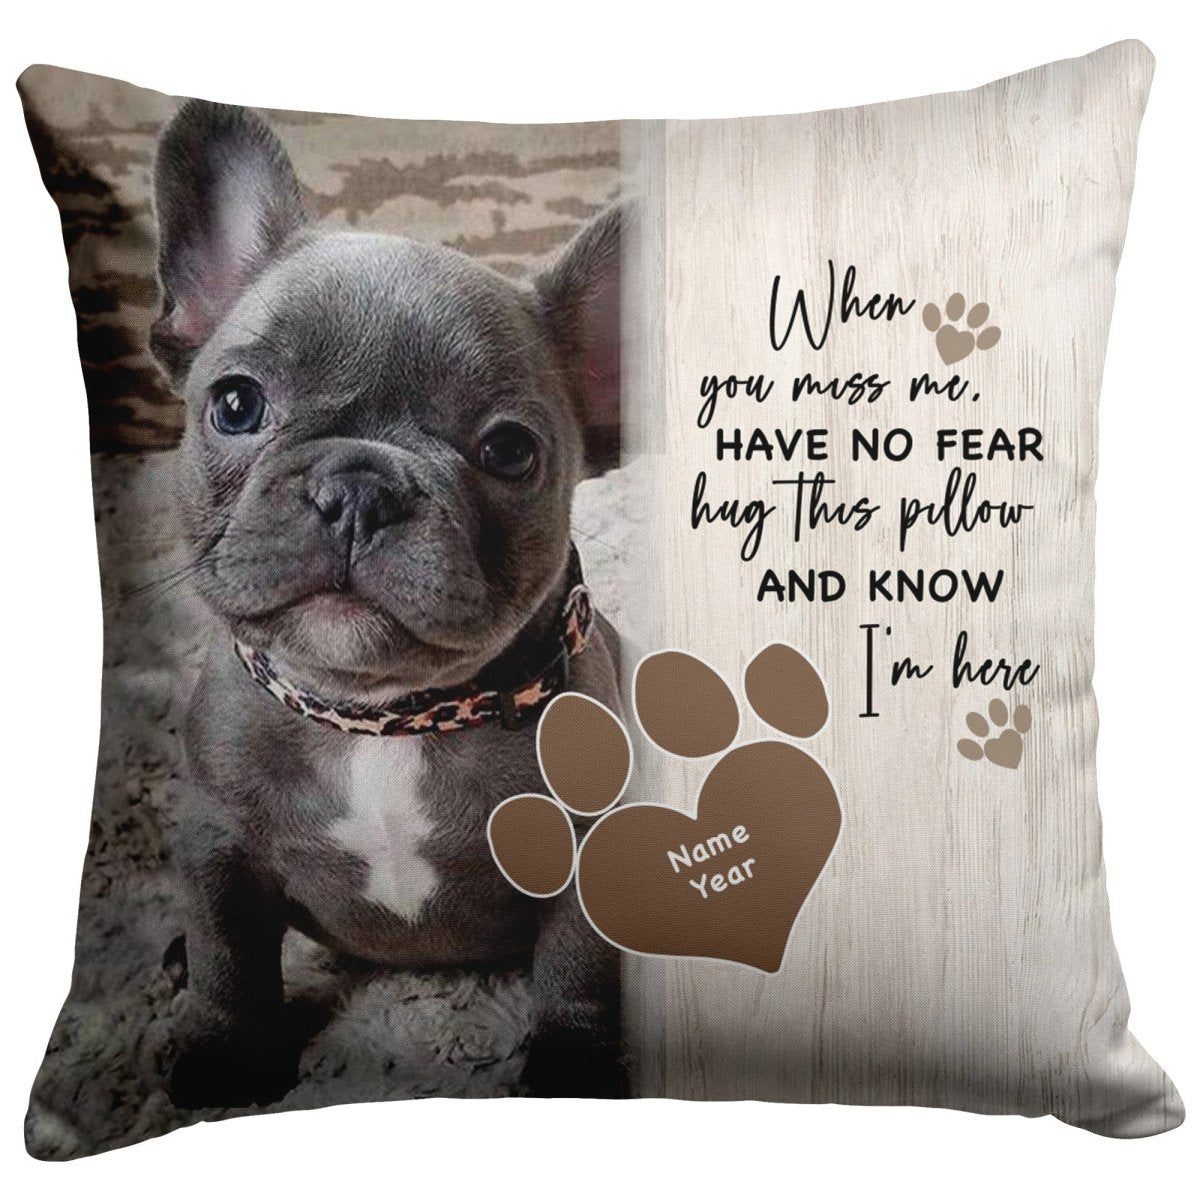 Personalized Gift To Grandma or Mom, Hugged This Little Pillow, Custom -  PersonalFury